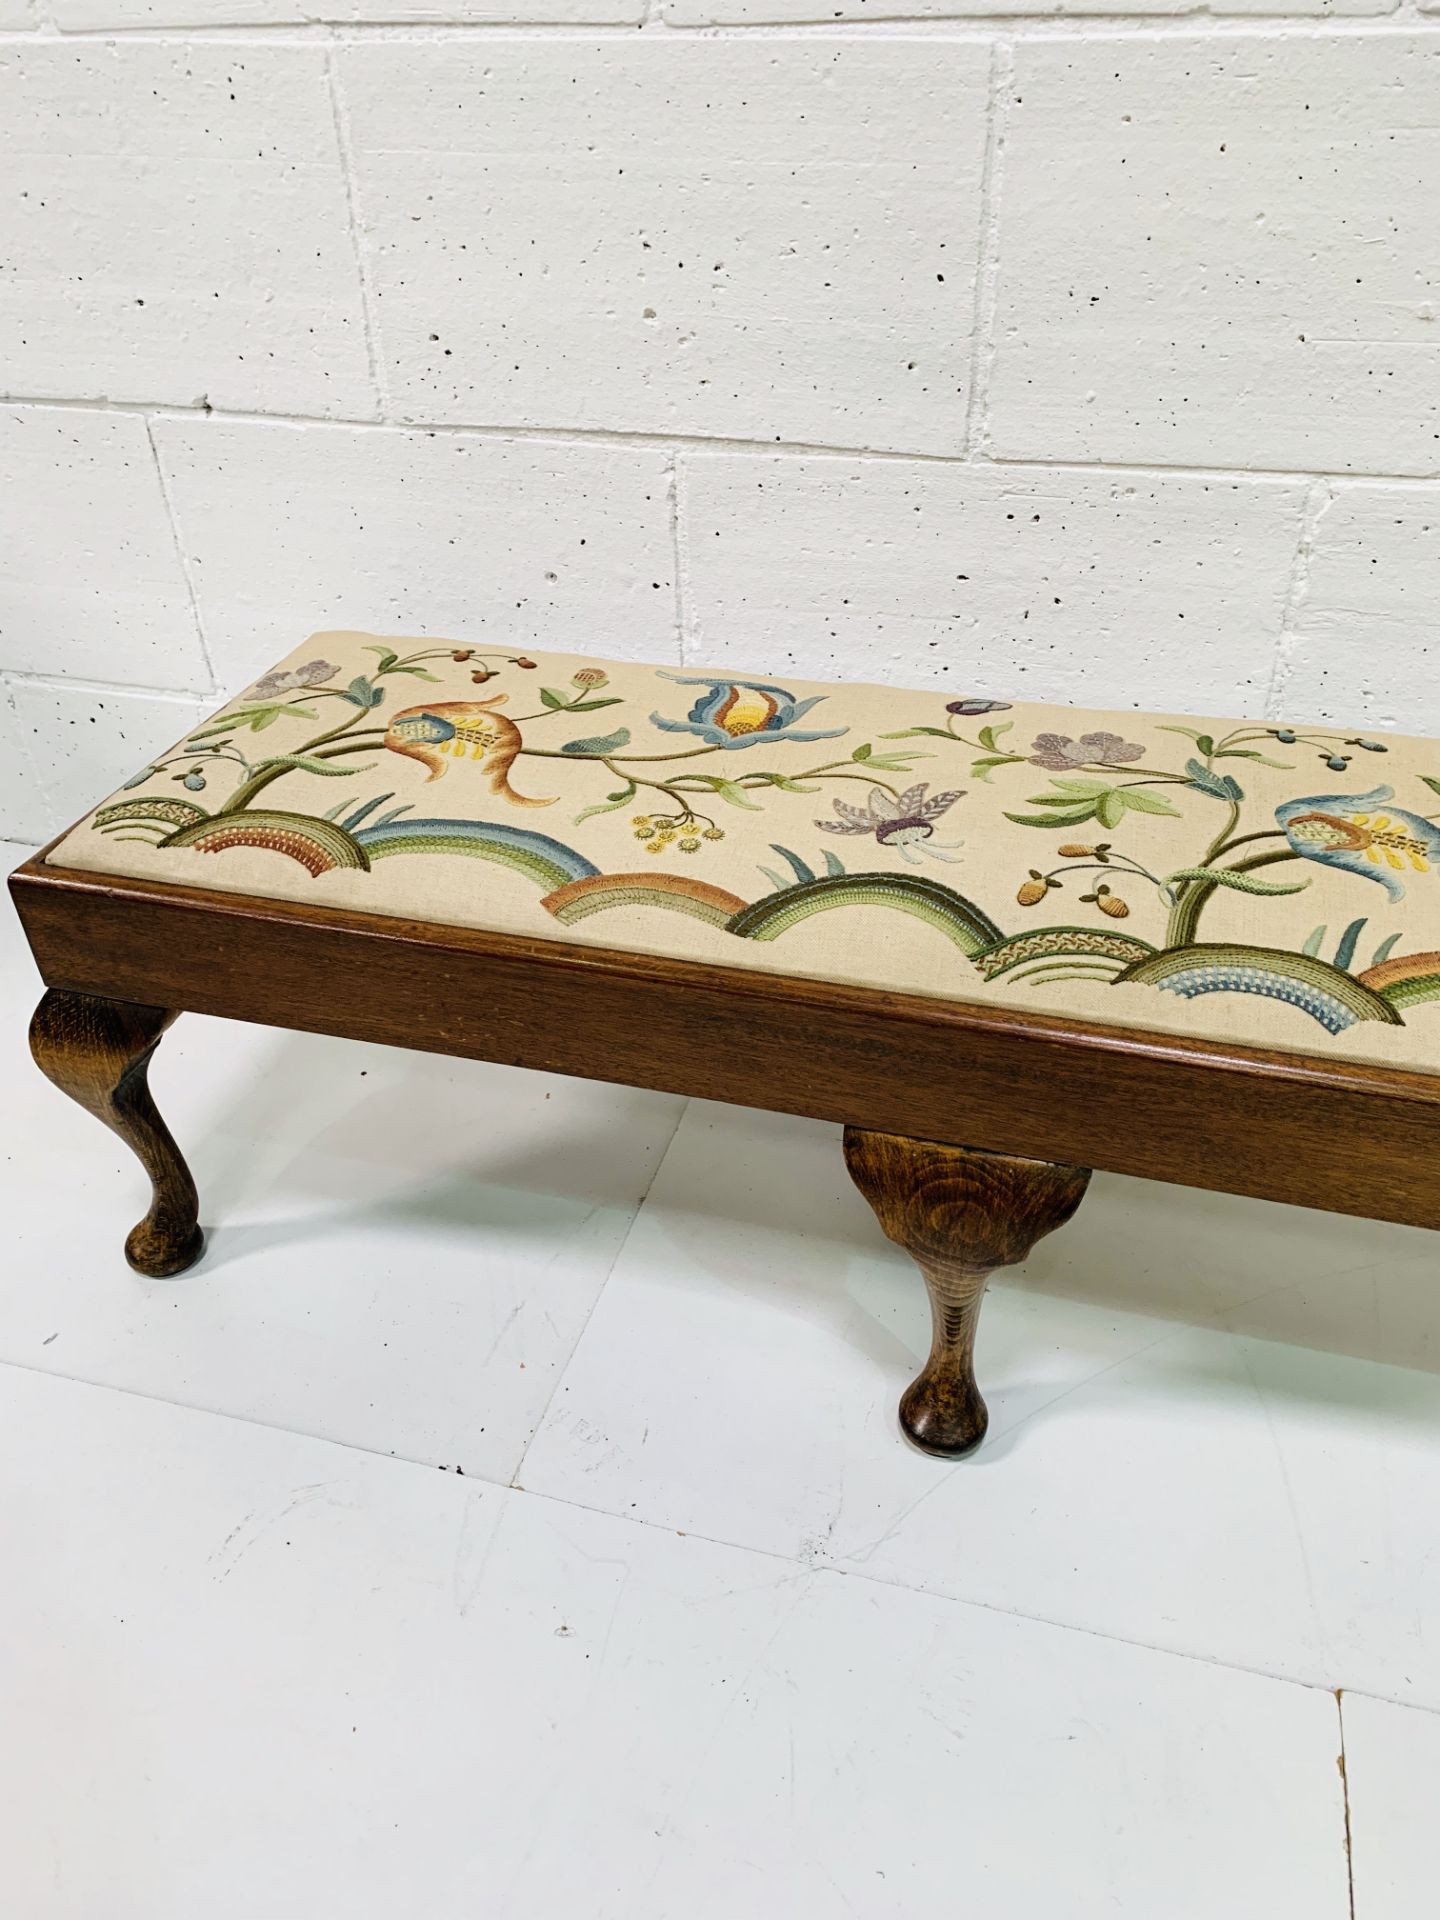 Oak framed long stool with tapestry seat depicting flowers. - Image 4 of 4